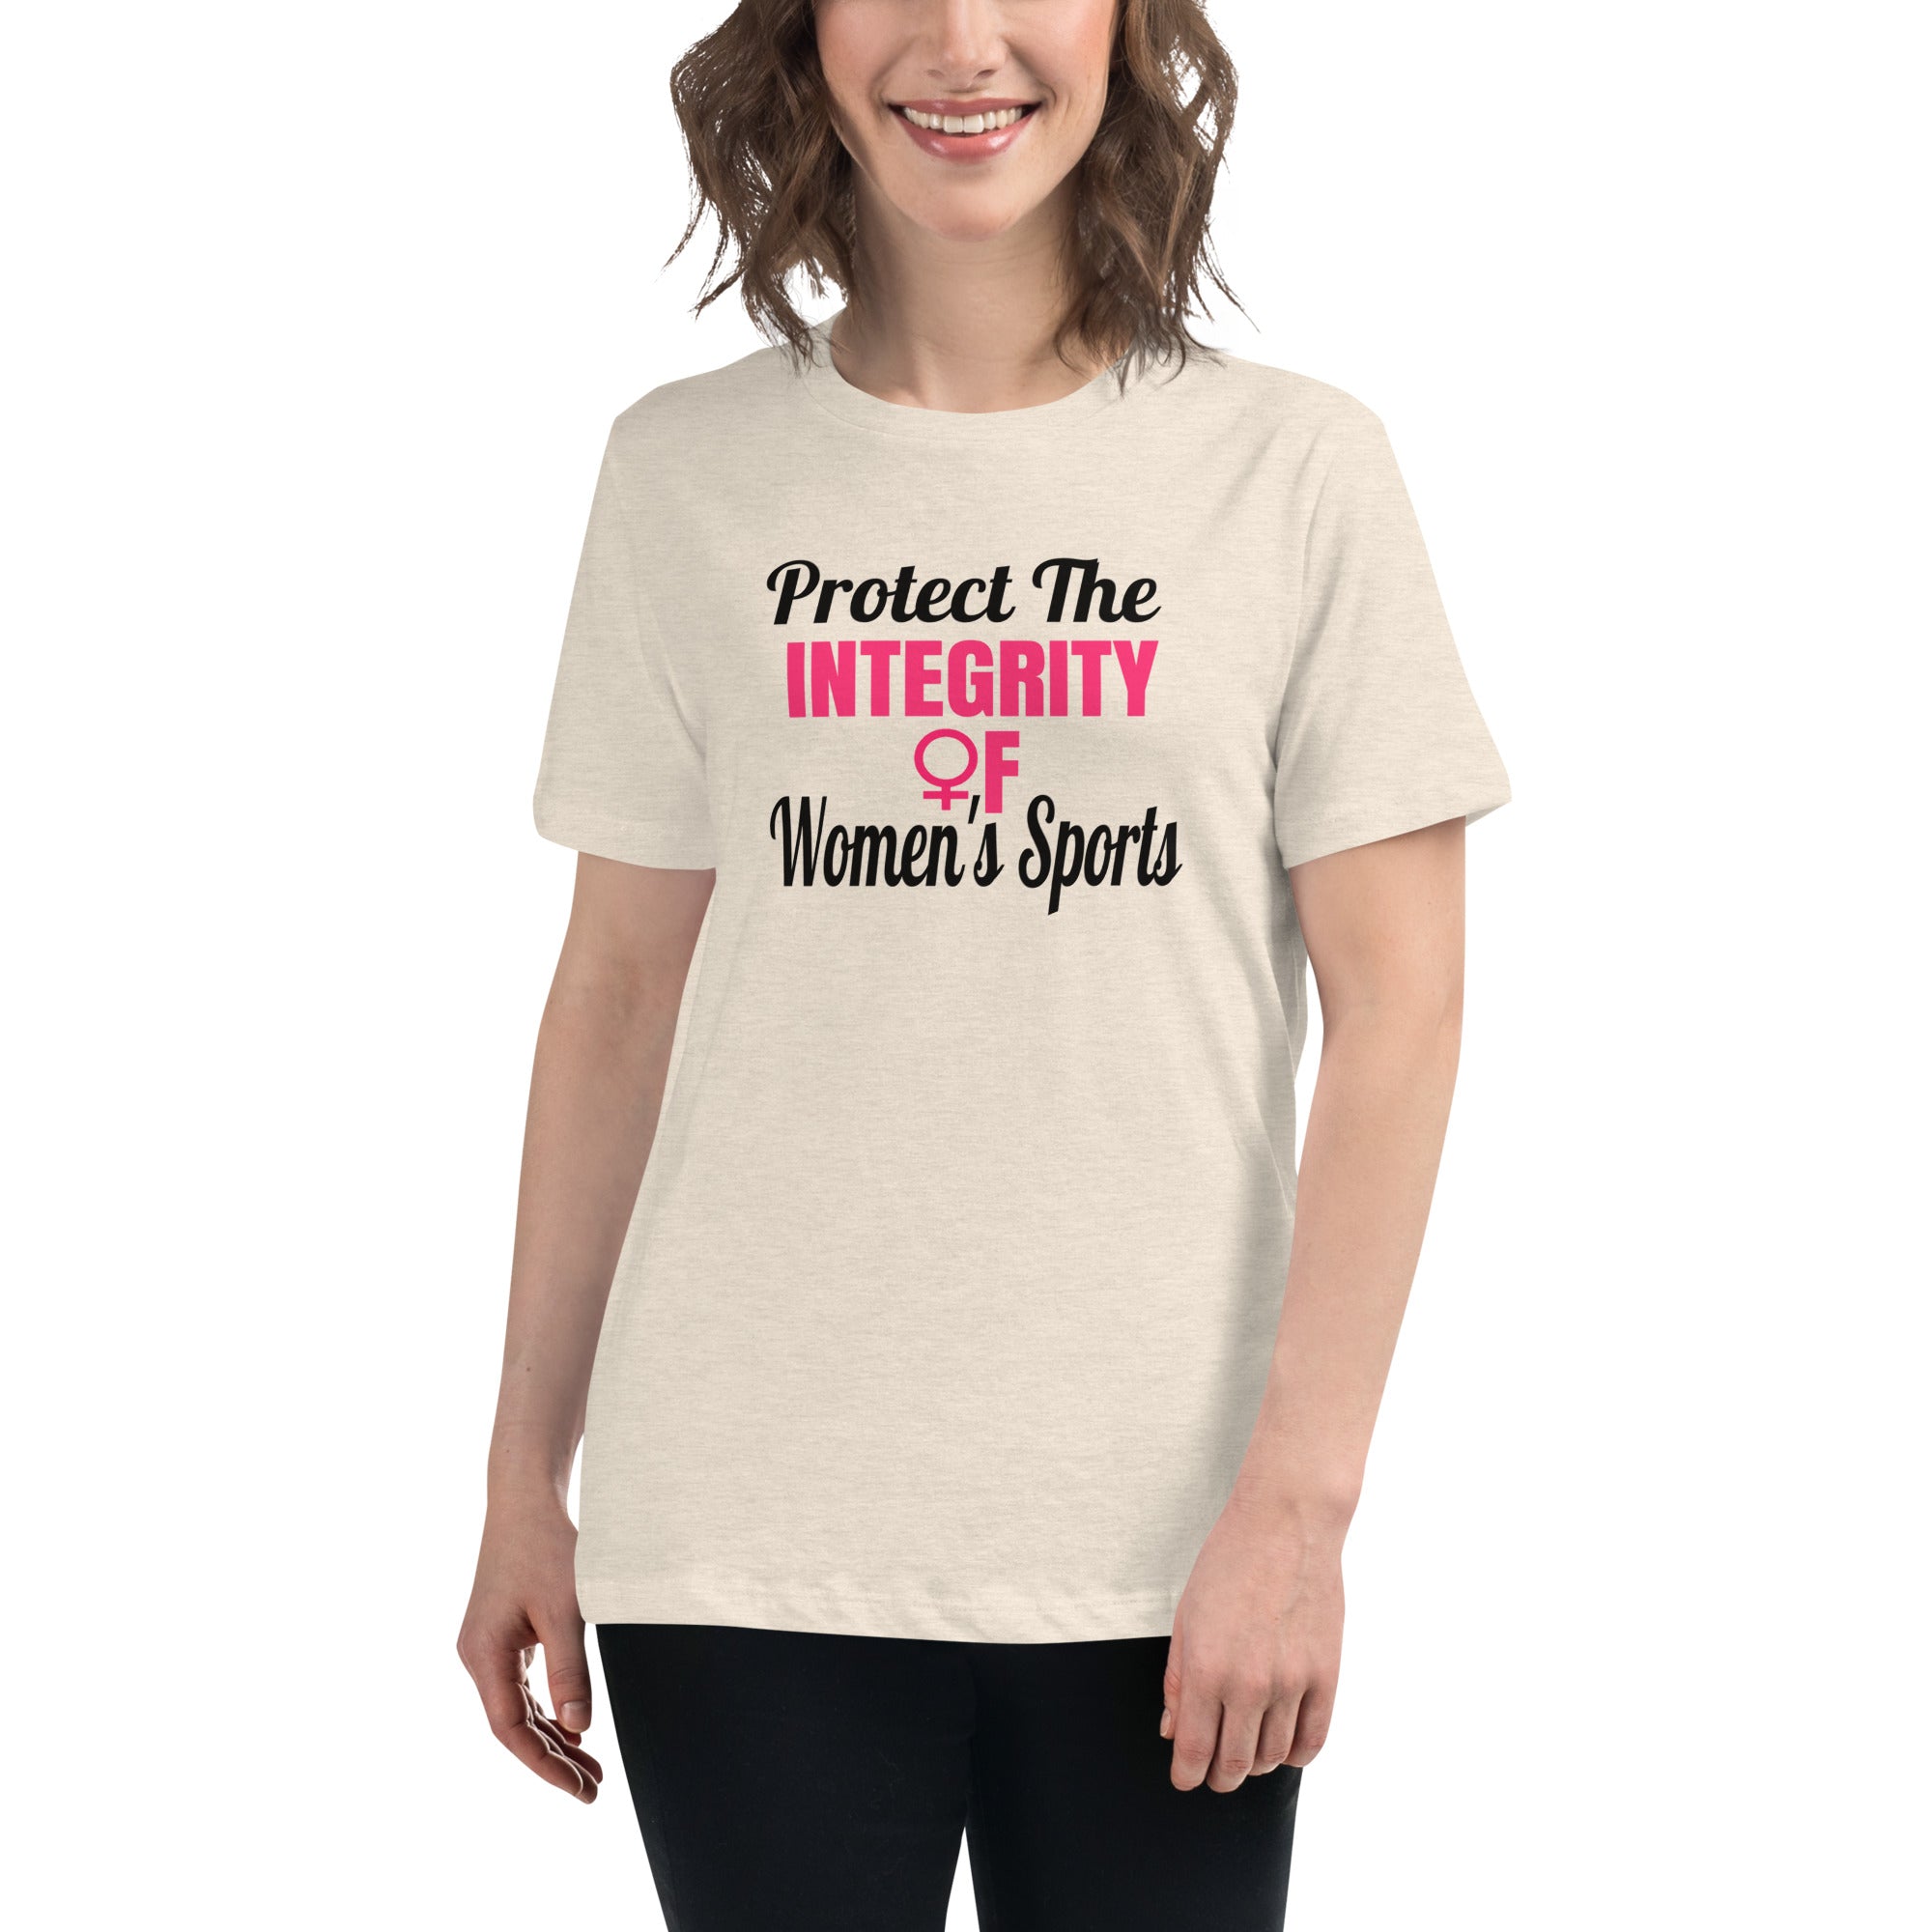 Protect The Integrity of Women's Sports Short Sleeve T-Shirt